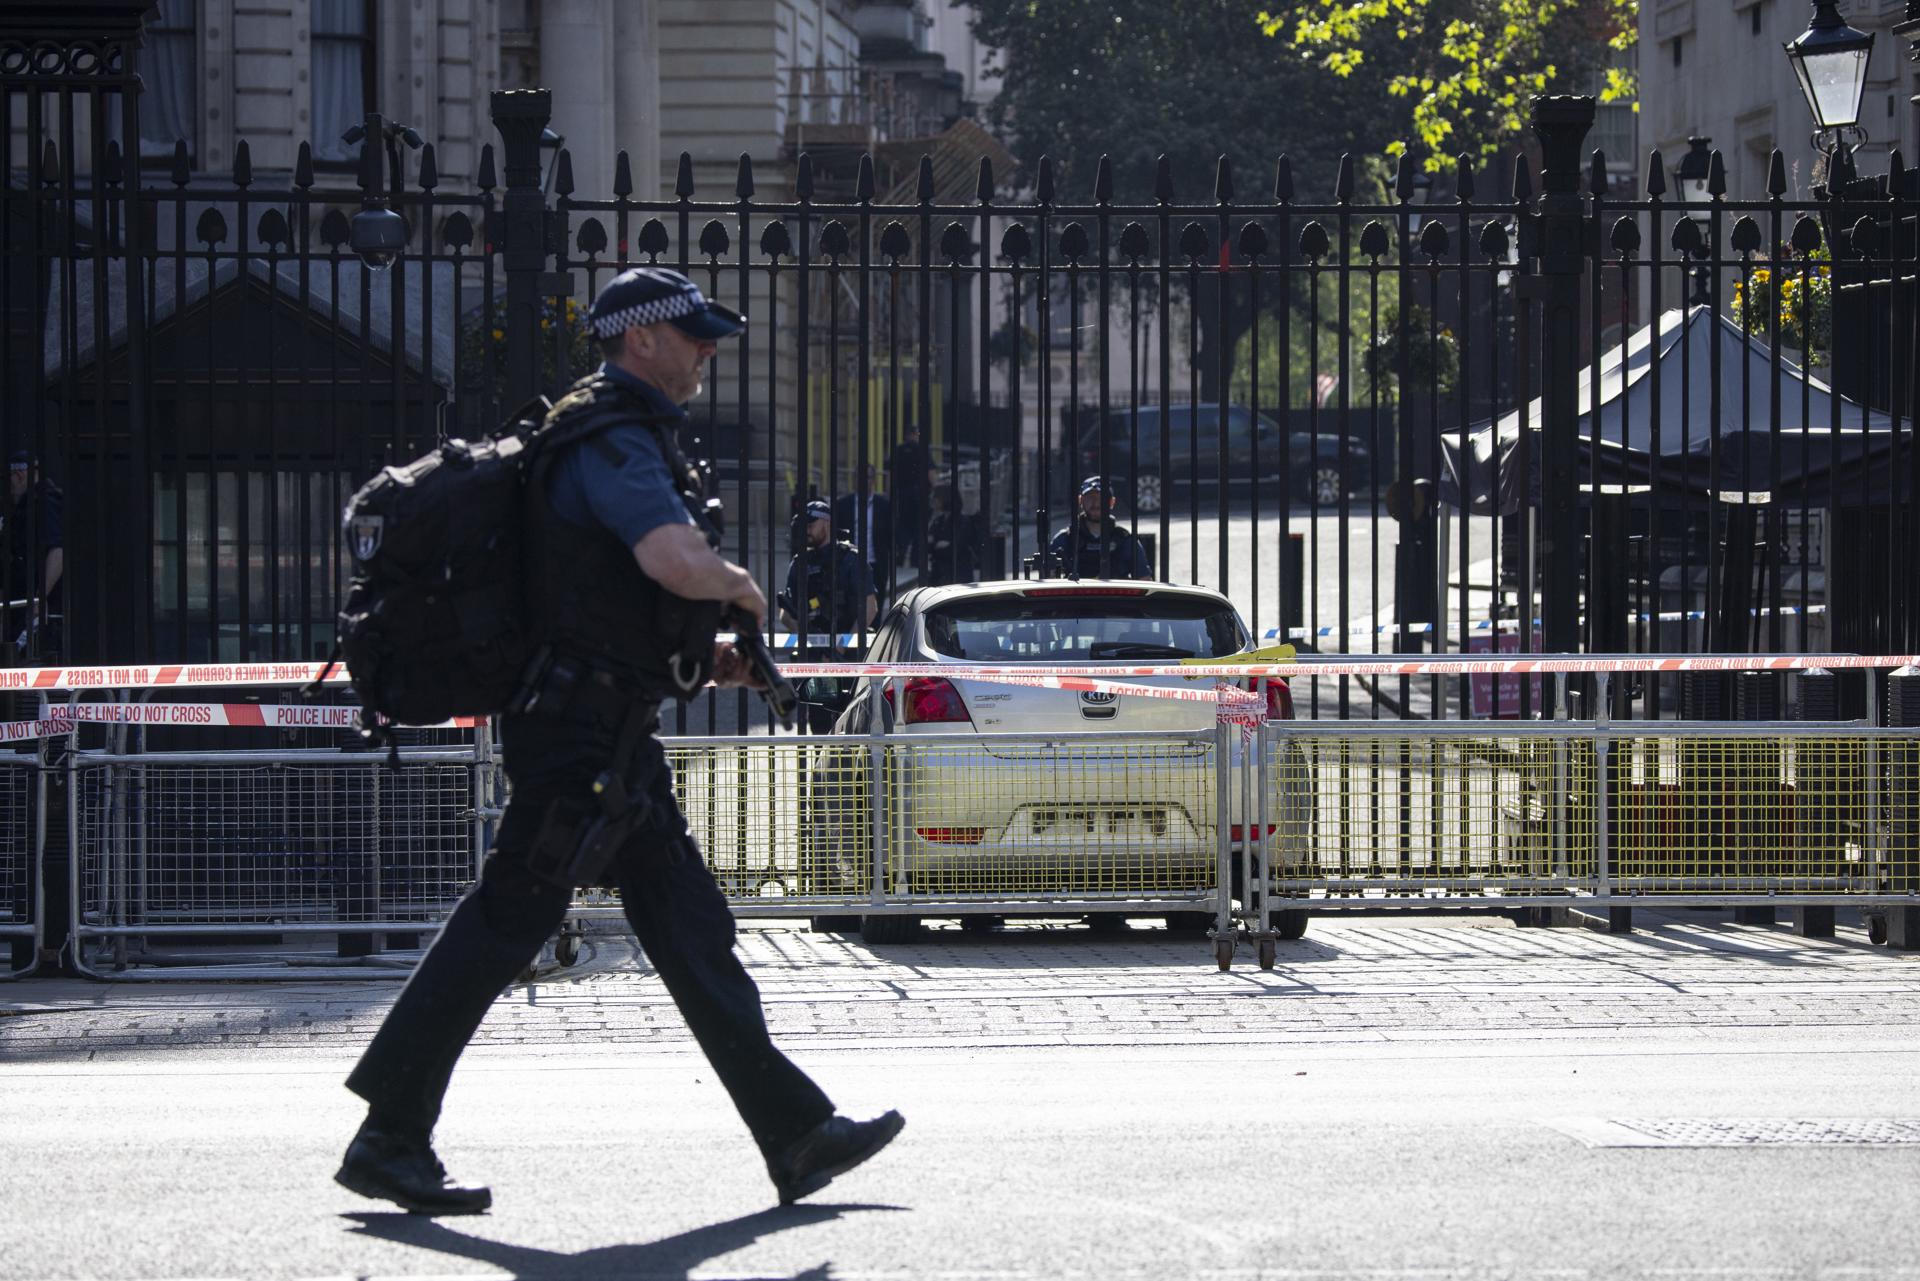 A file picture showing police officers in Downing Street, the official residence of British Prime Minister in London, Britain. EFE/EPA/FILE/TOLGA AKMEN